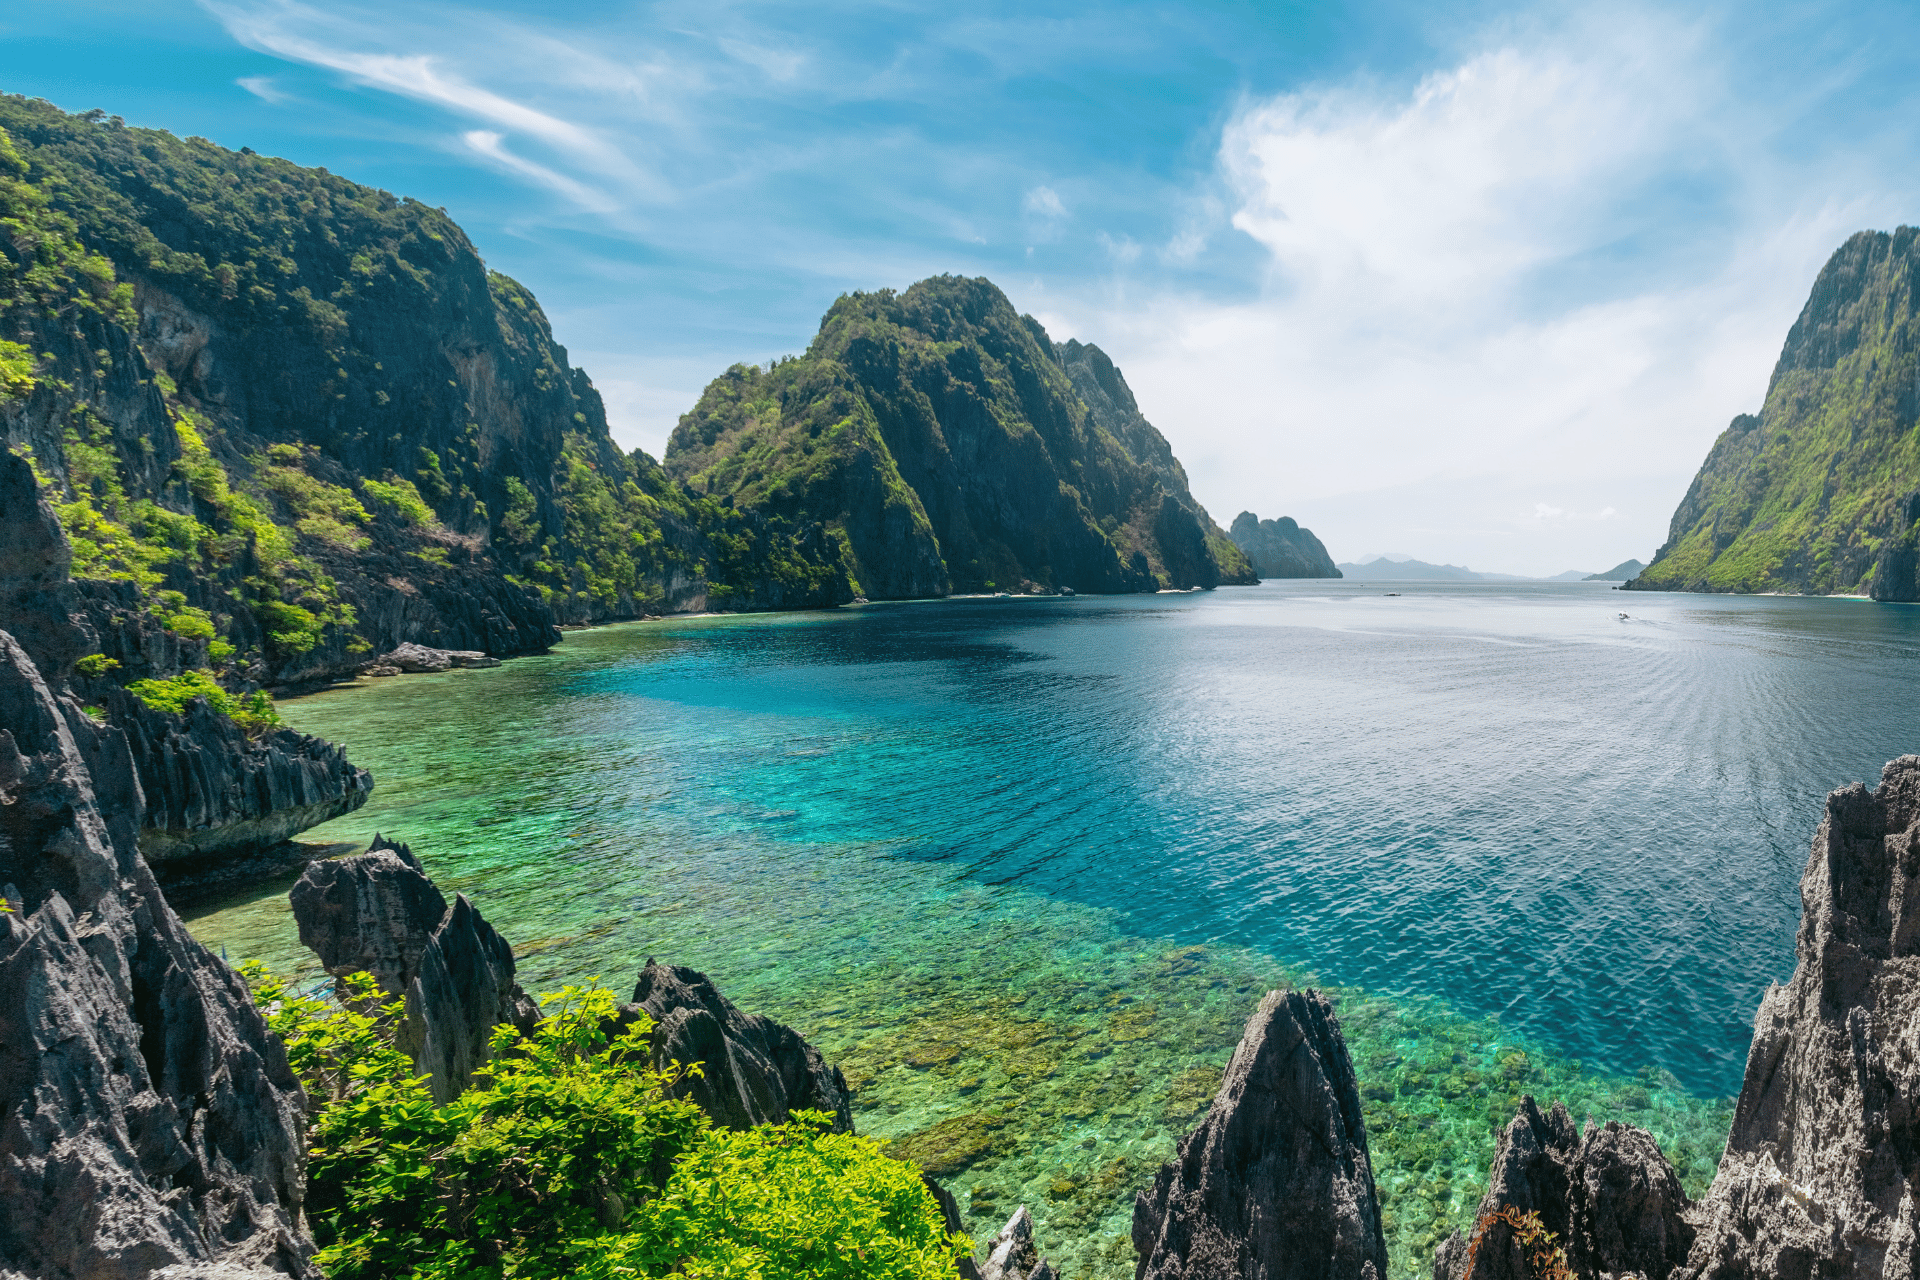 A view of the waters of The Philippines